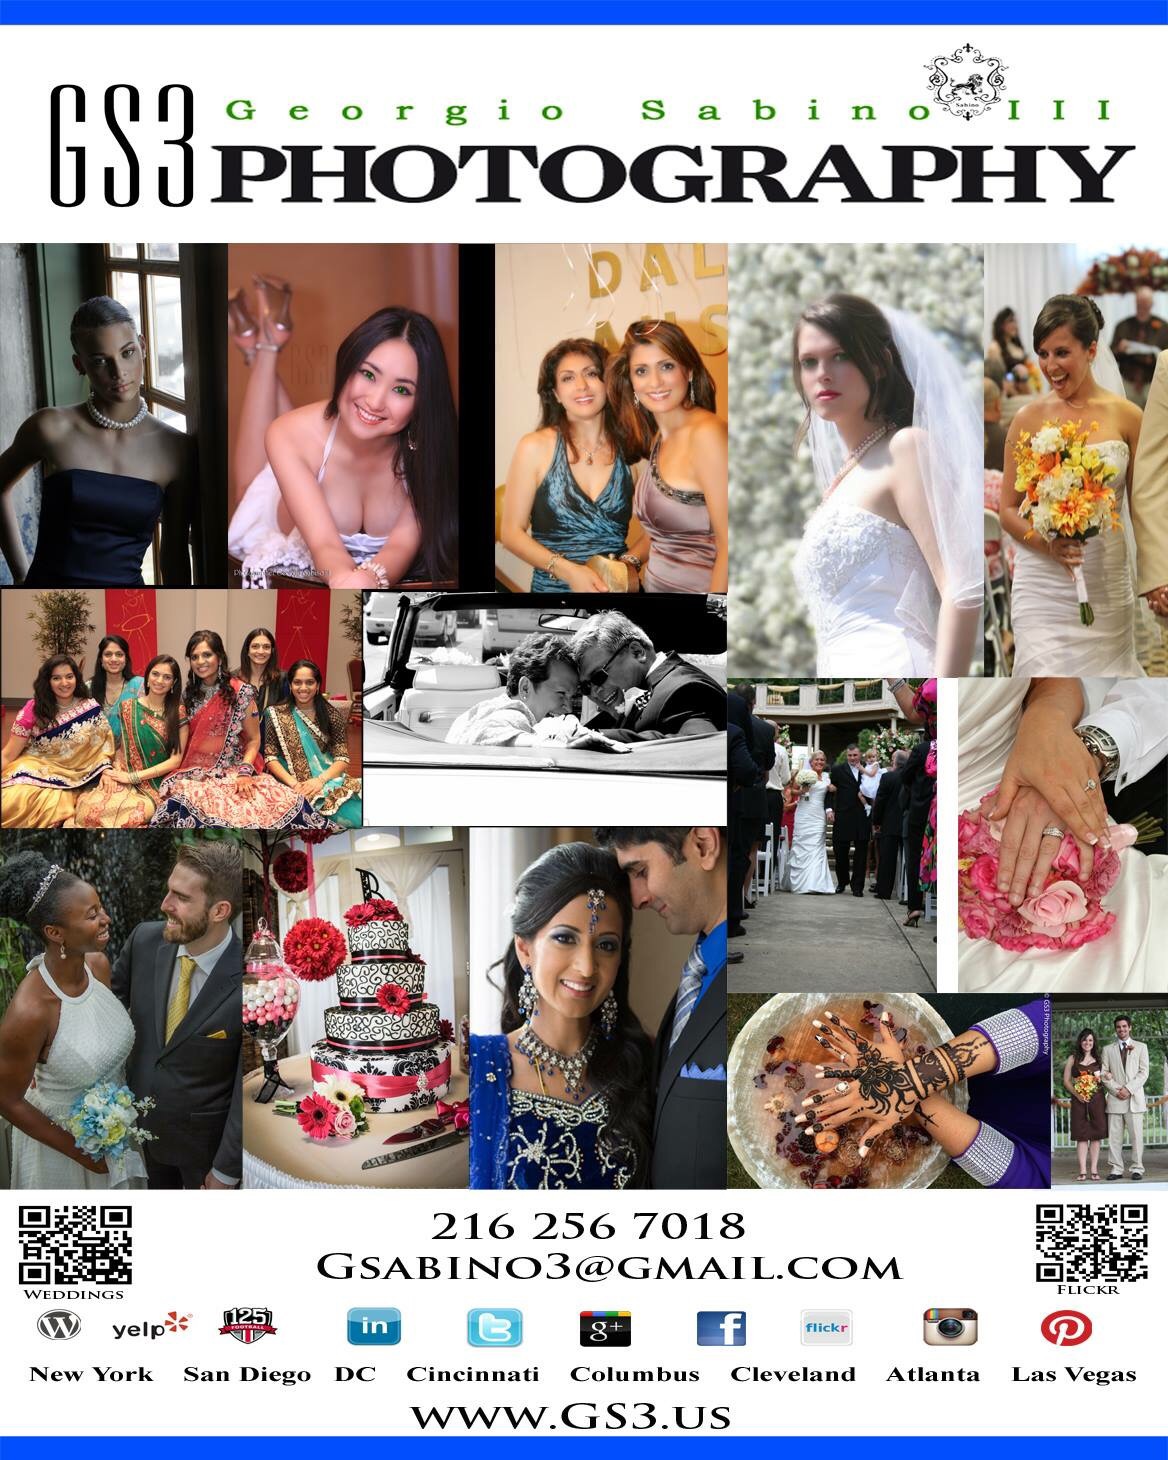 GS3 Wedding Photography is a multi-media design firm that individually designs personal sessions and packages for weddings, corporate, fashion and family photography, and other multi-media art for private and corporate collections. We do have (special rates) for small events, parties and even small wedding celebrations. Also special pricing applies to common 2 day or destination wedding events. @WorldWeddingPhotographer, @ColumbusOhioPhotographer, #eventsphotographer, #bridestory, #photographylovers, #GeorgioSabino,#GS3WeddingPhotographer; #GS3Photographer; #GS3Photography; #FineArtPhotography; #MastersPhotographer; #Bride; #Brides; #Engagements,